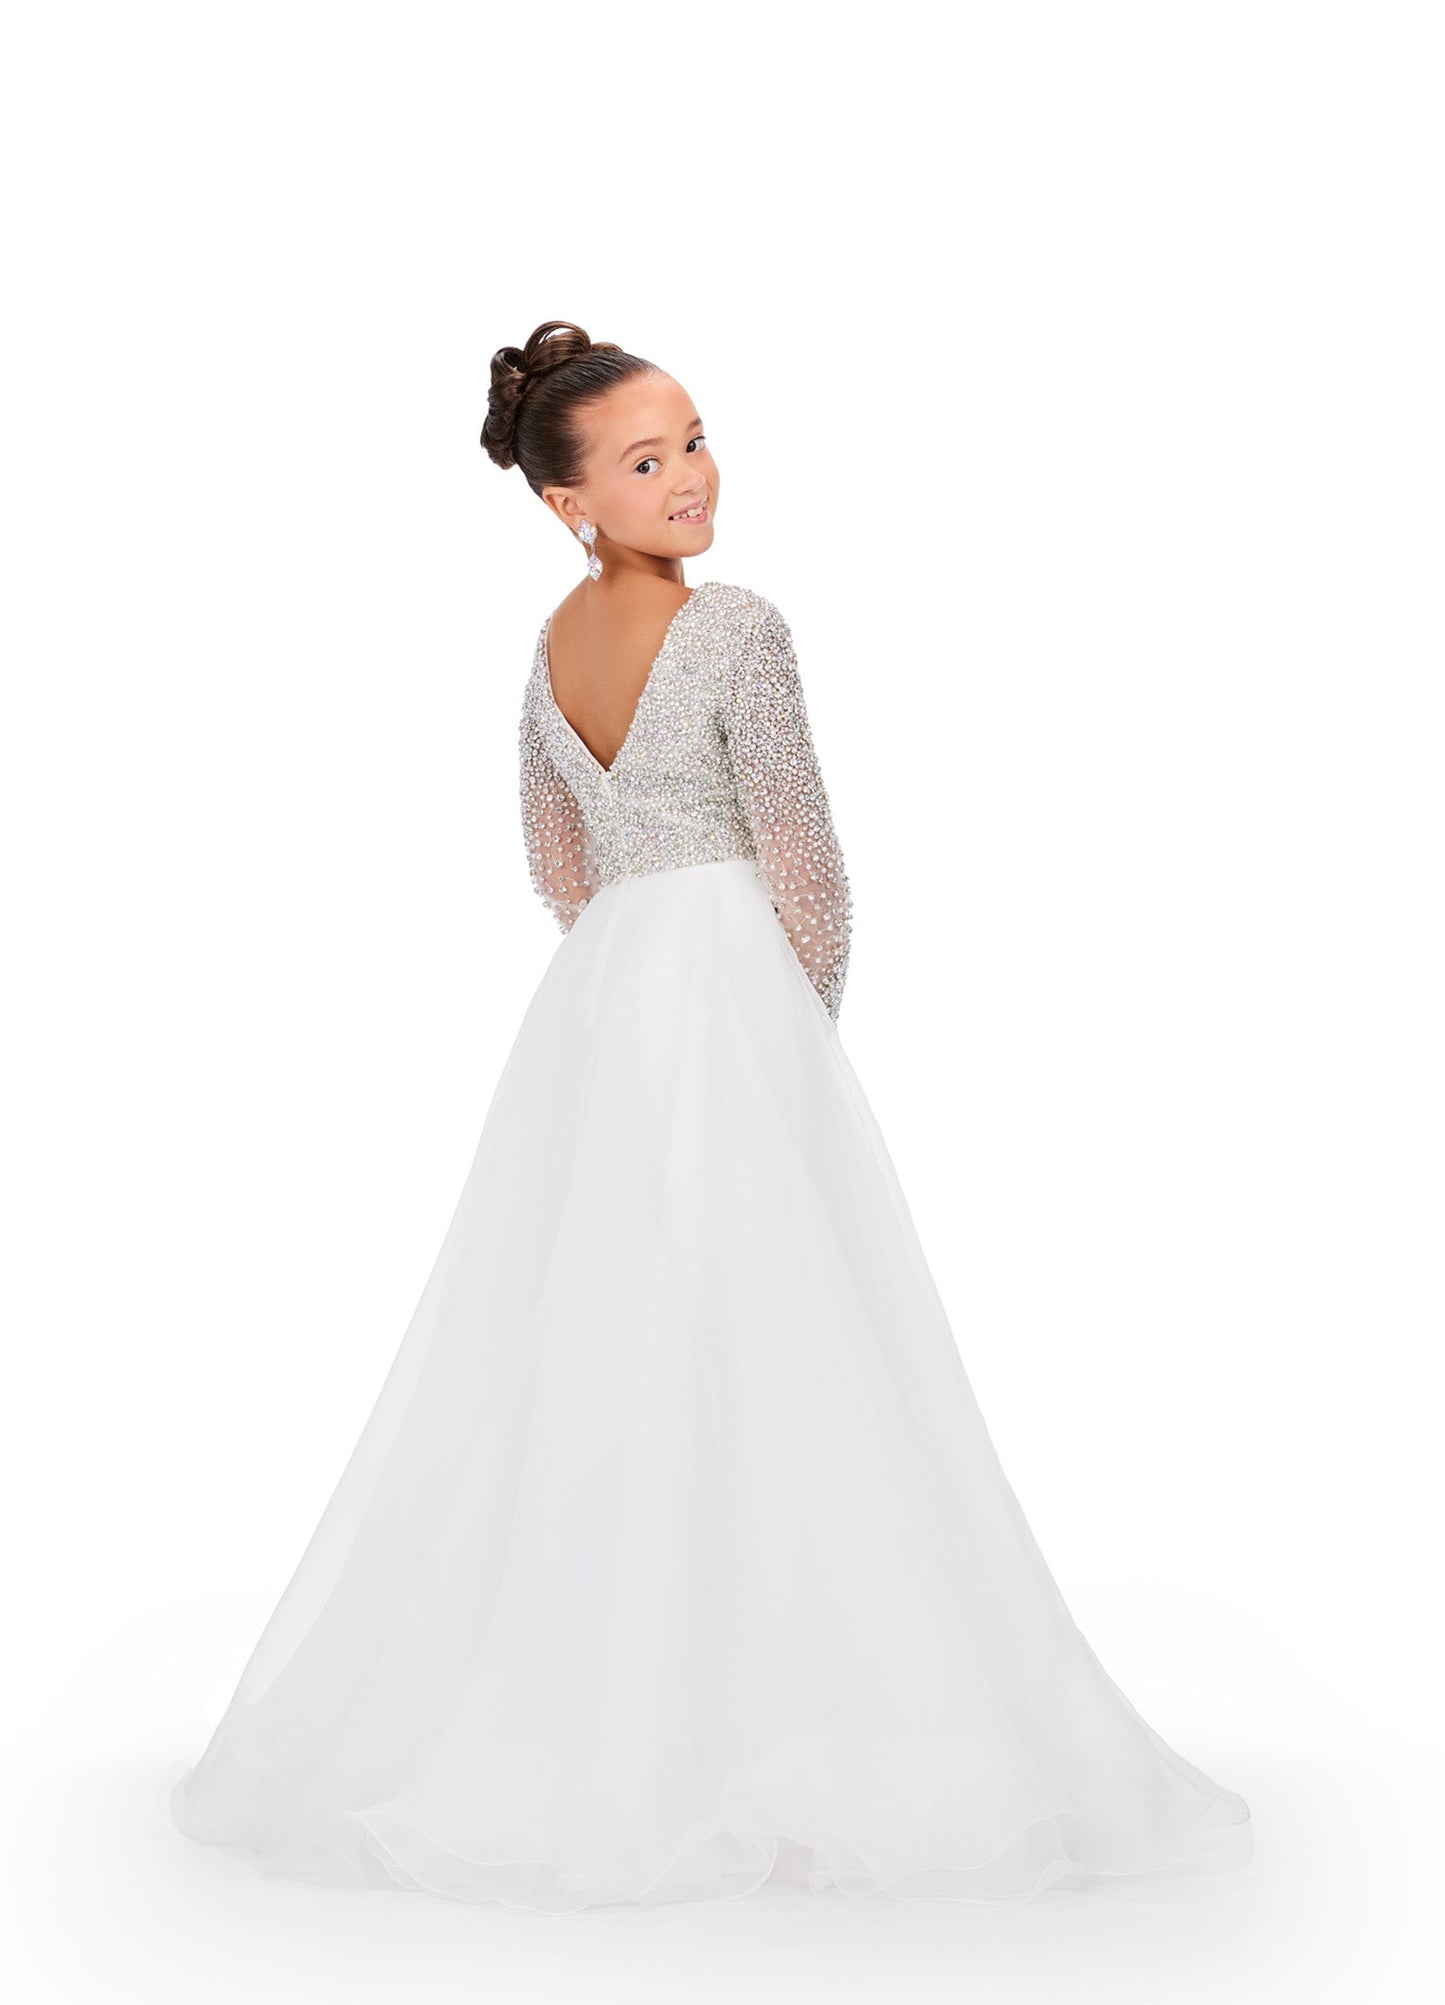 Elevate your little girl's style with this stunning Ashley Lauren Kids 8271 Pageant Dress. The intricate beaded details and long sleeve design add elegance and grace to the A-line silhouette, making her stand out on stage. Crafted with high-quality materials, this dress ensures unbeatable comfort and lasting wear. This elegant kids organza gown features a v-neckline with crystal and pearl details. The look is completed with long sleeves and an a-line skirt.